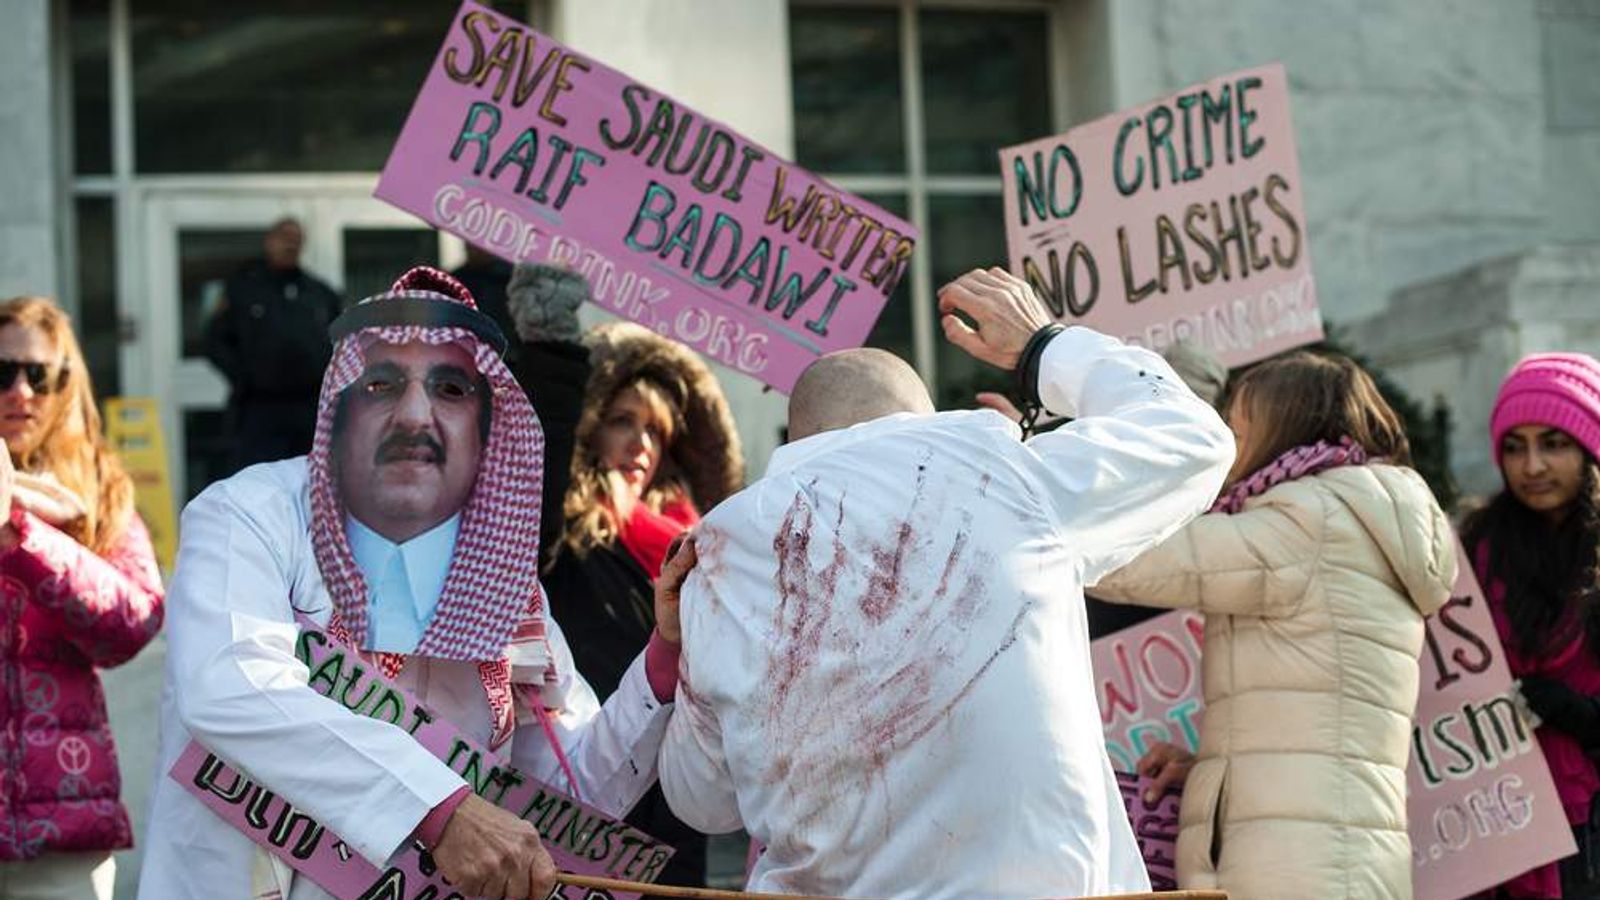 The Crimes That Carry The Death Penalty In Saudi Arabia Scoop News